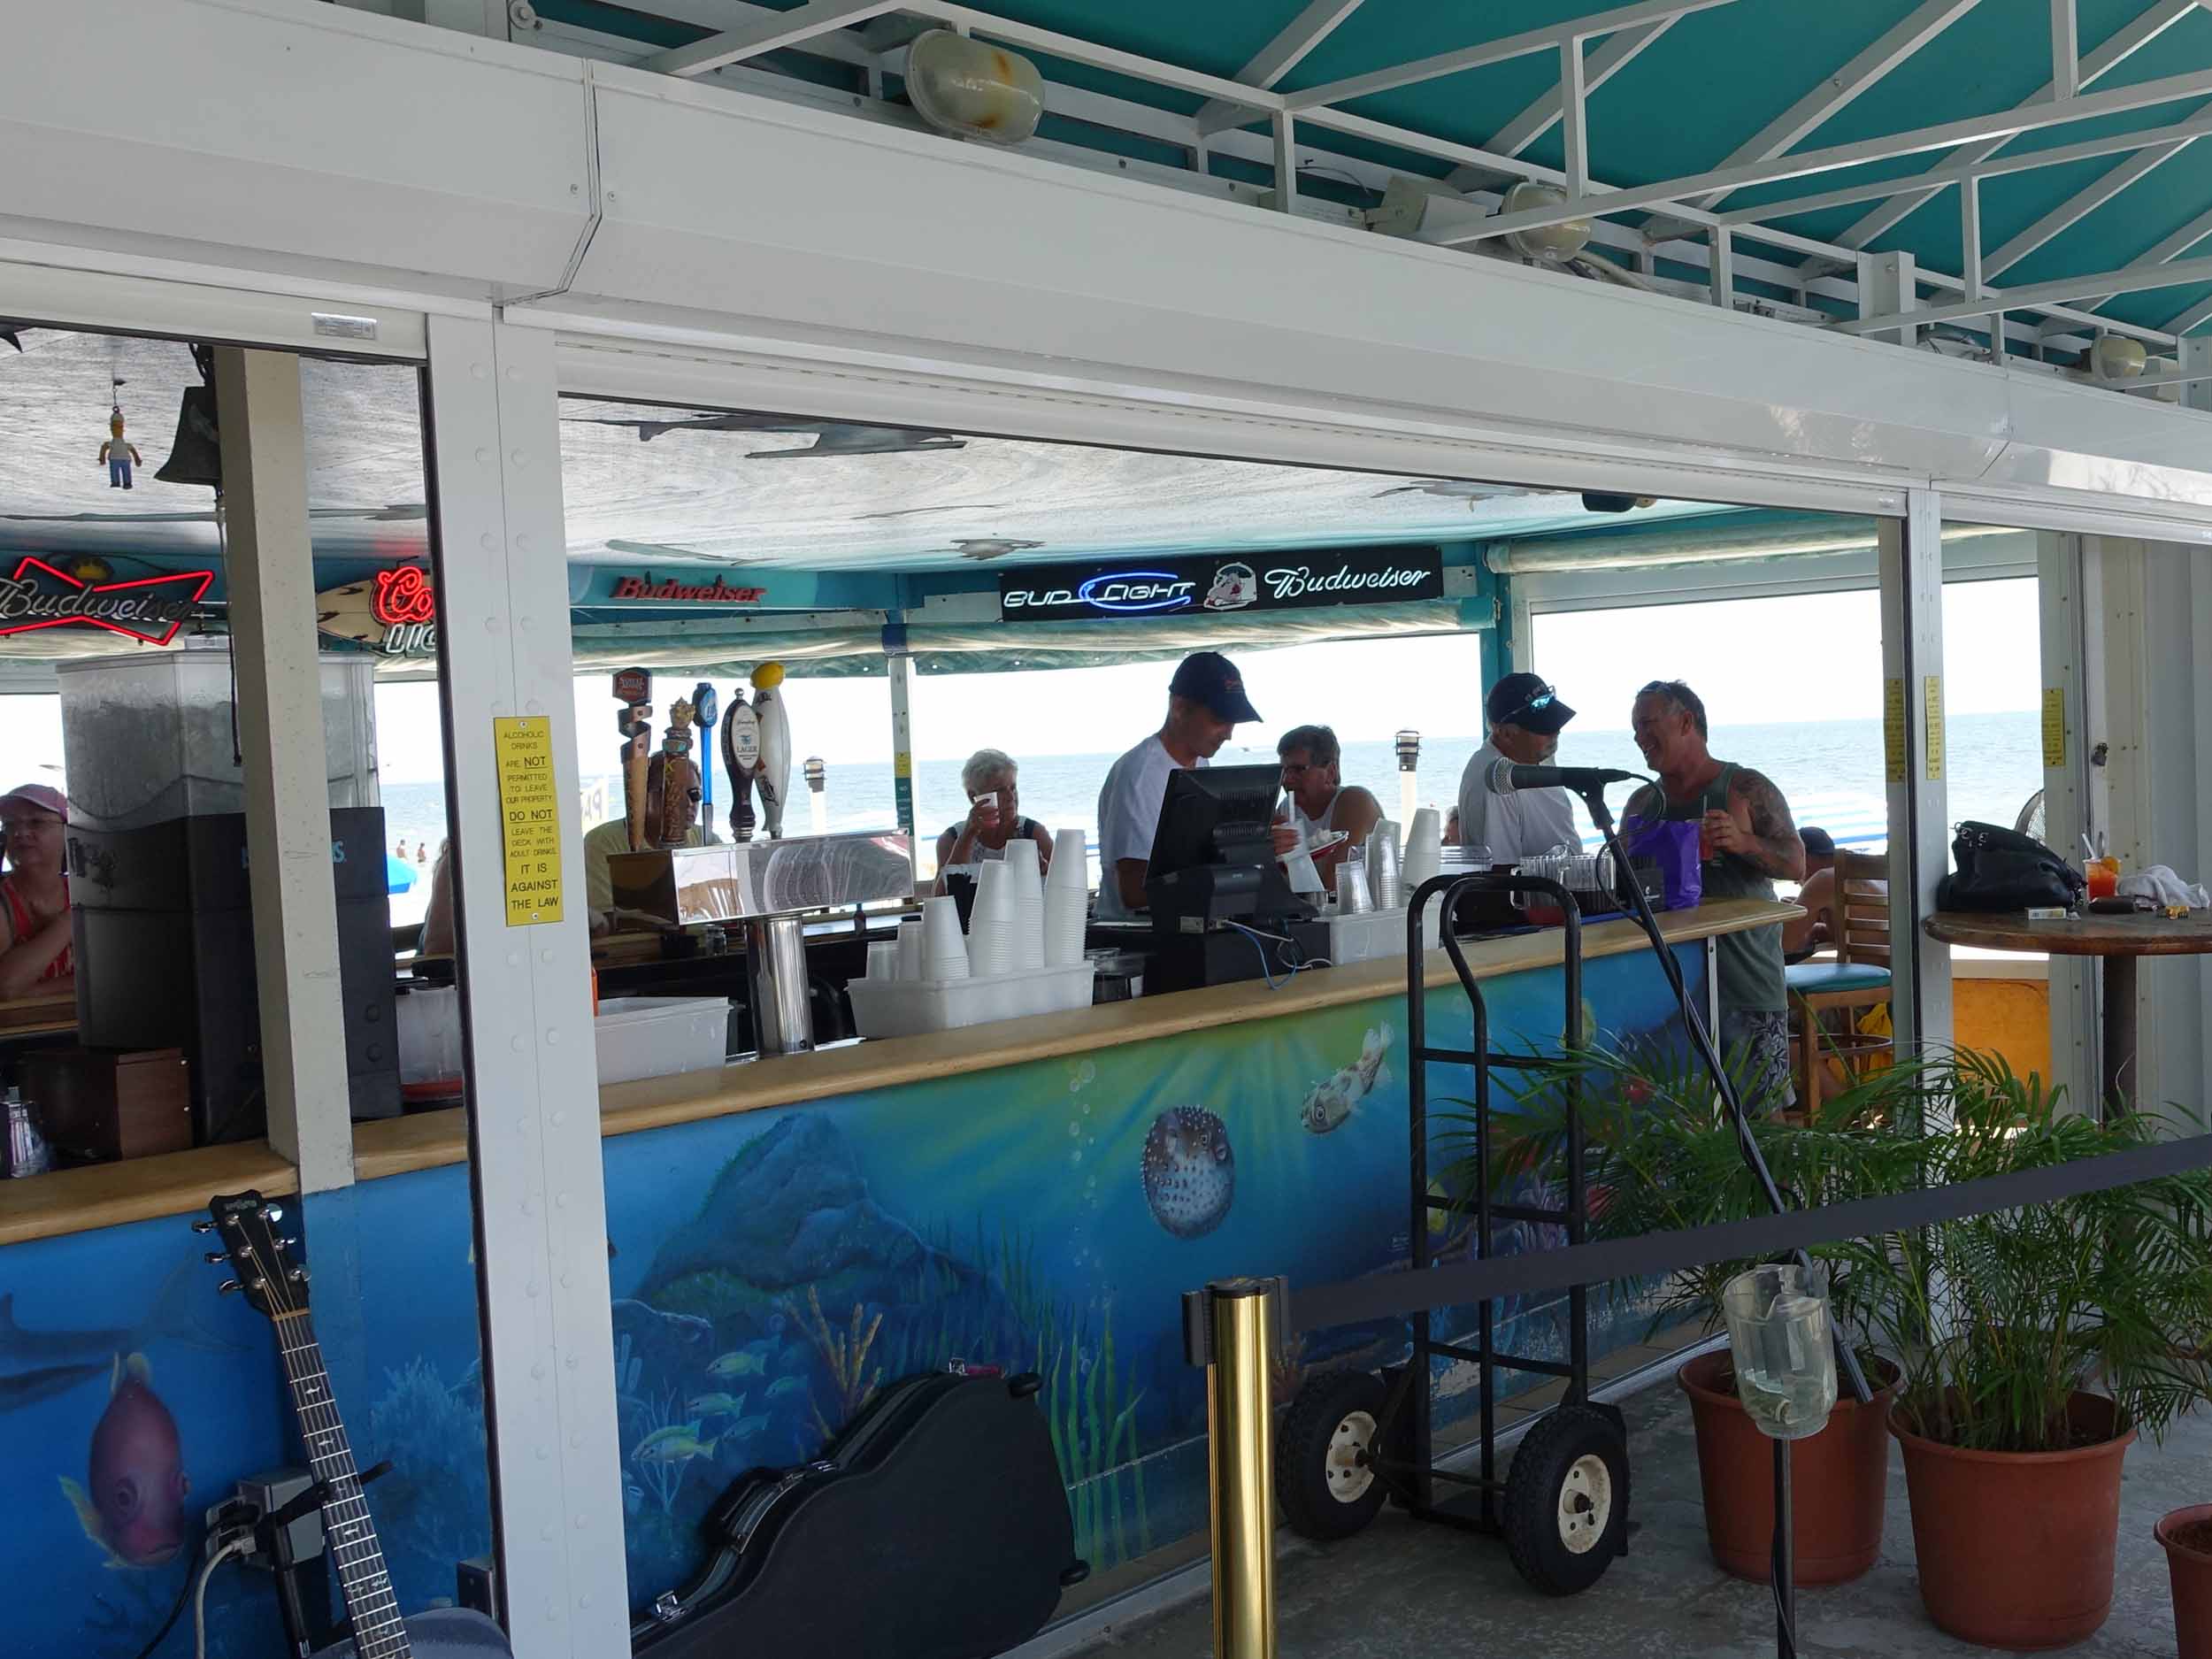 Pierside Grill and Famous Blowfish Bar